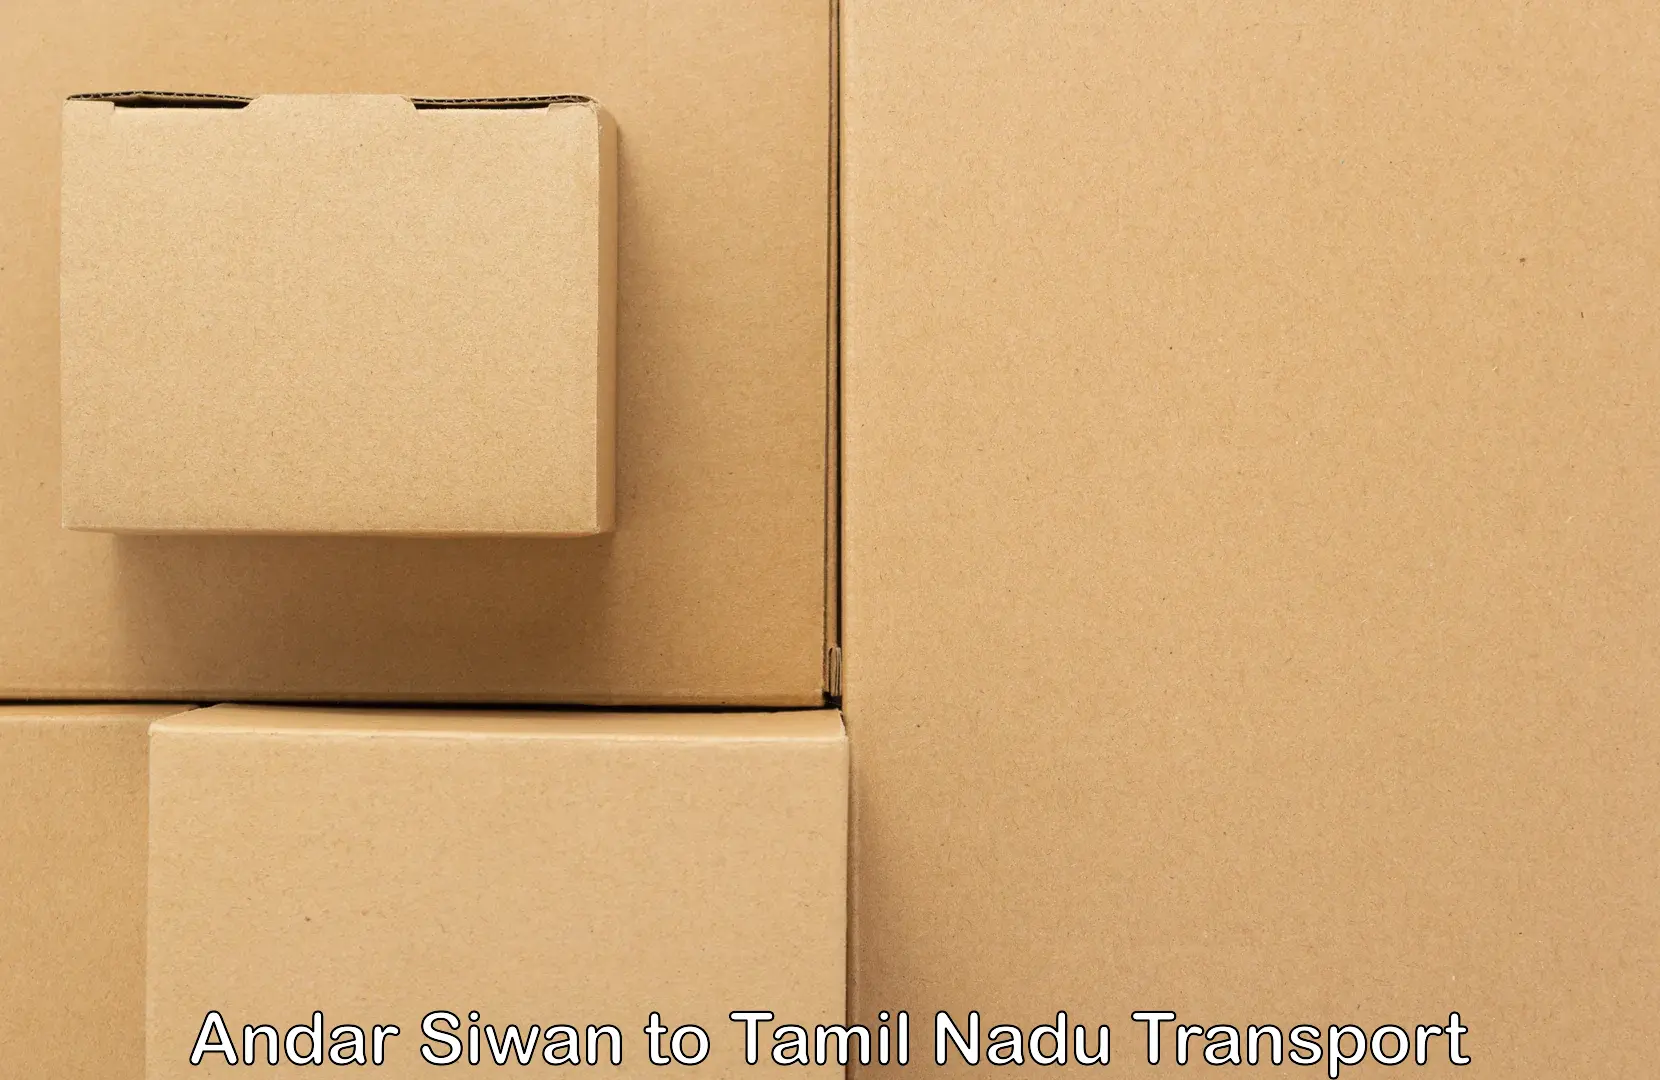 Air freight transport services in Andar Siwan to Perambalur